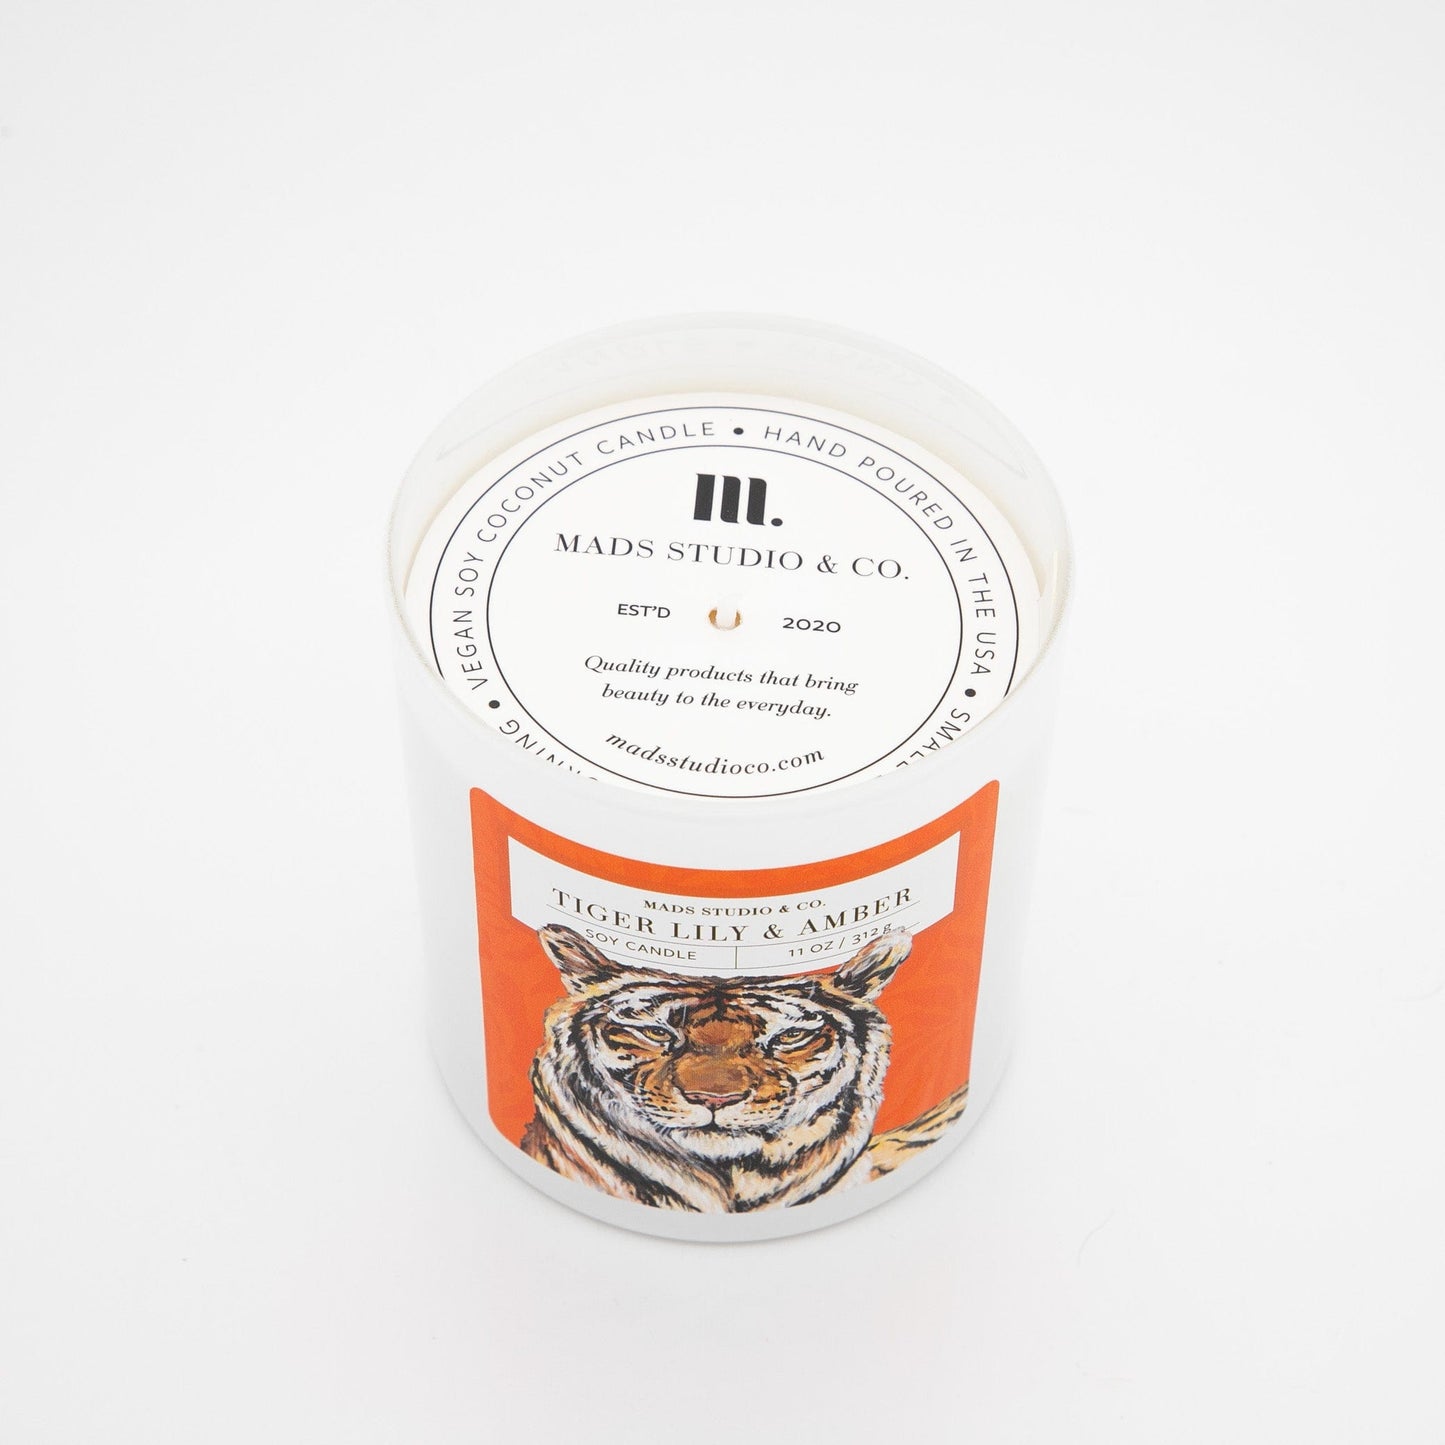 Tiger Lily and Amber Soy Candle–11 oz